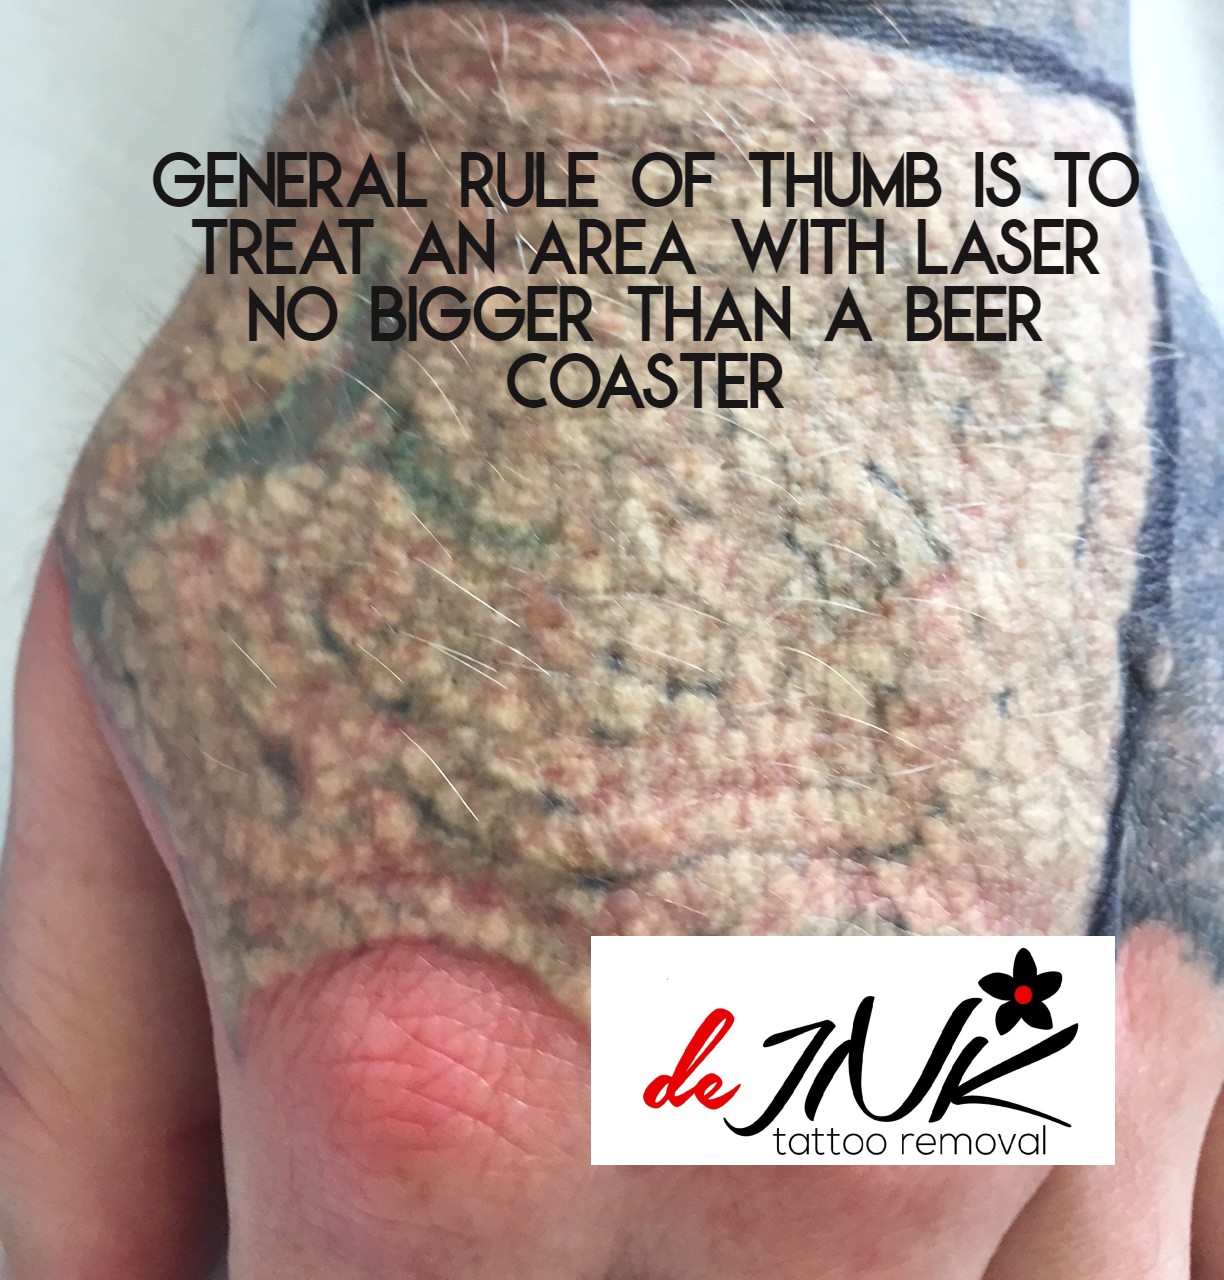 Can Laser Tattoo Removal Make You Sick?